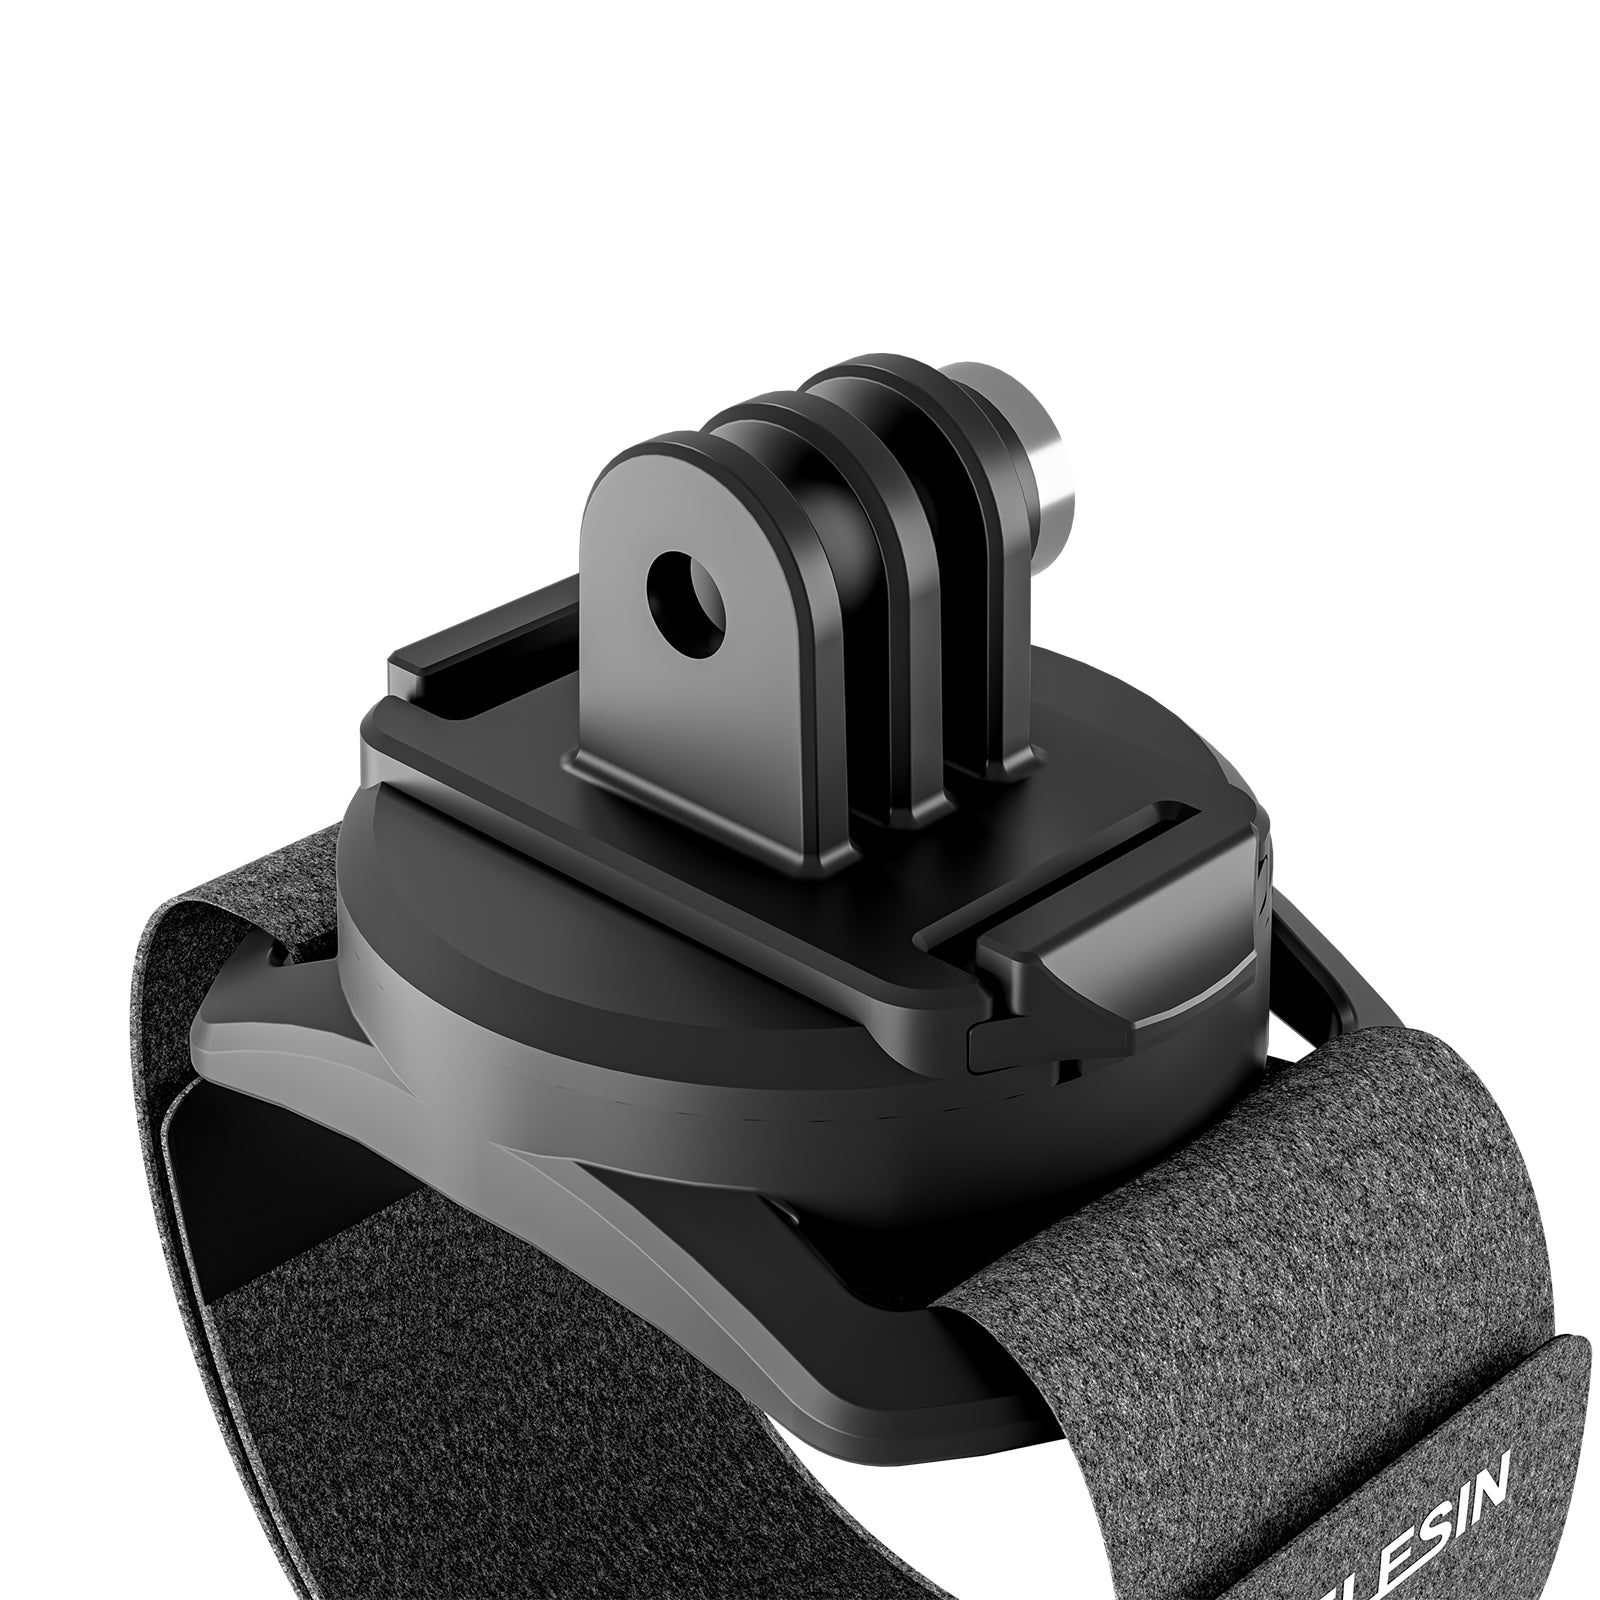 TELESIN 360 Degree Steerable Wrist Strap for Action Camera